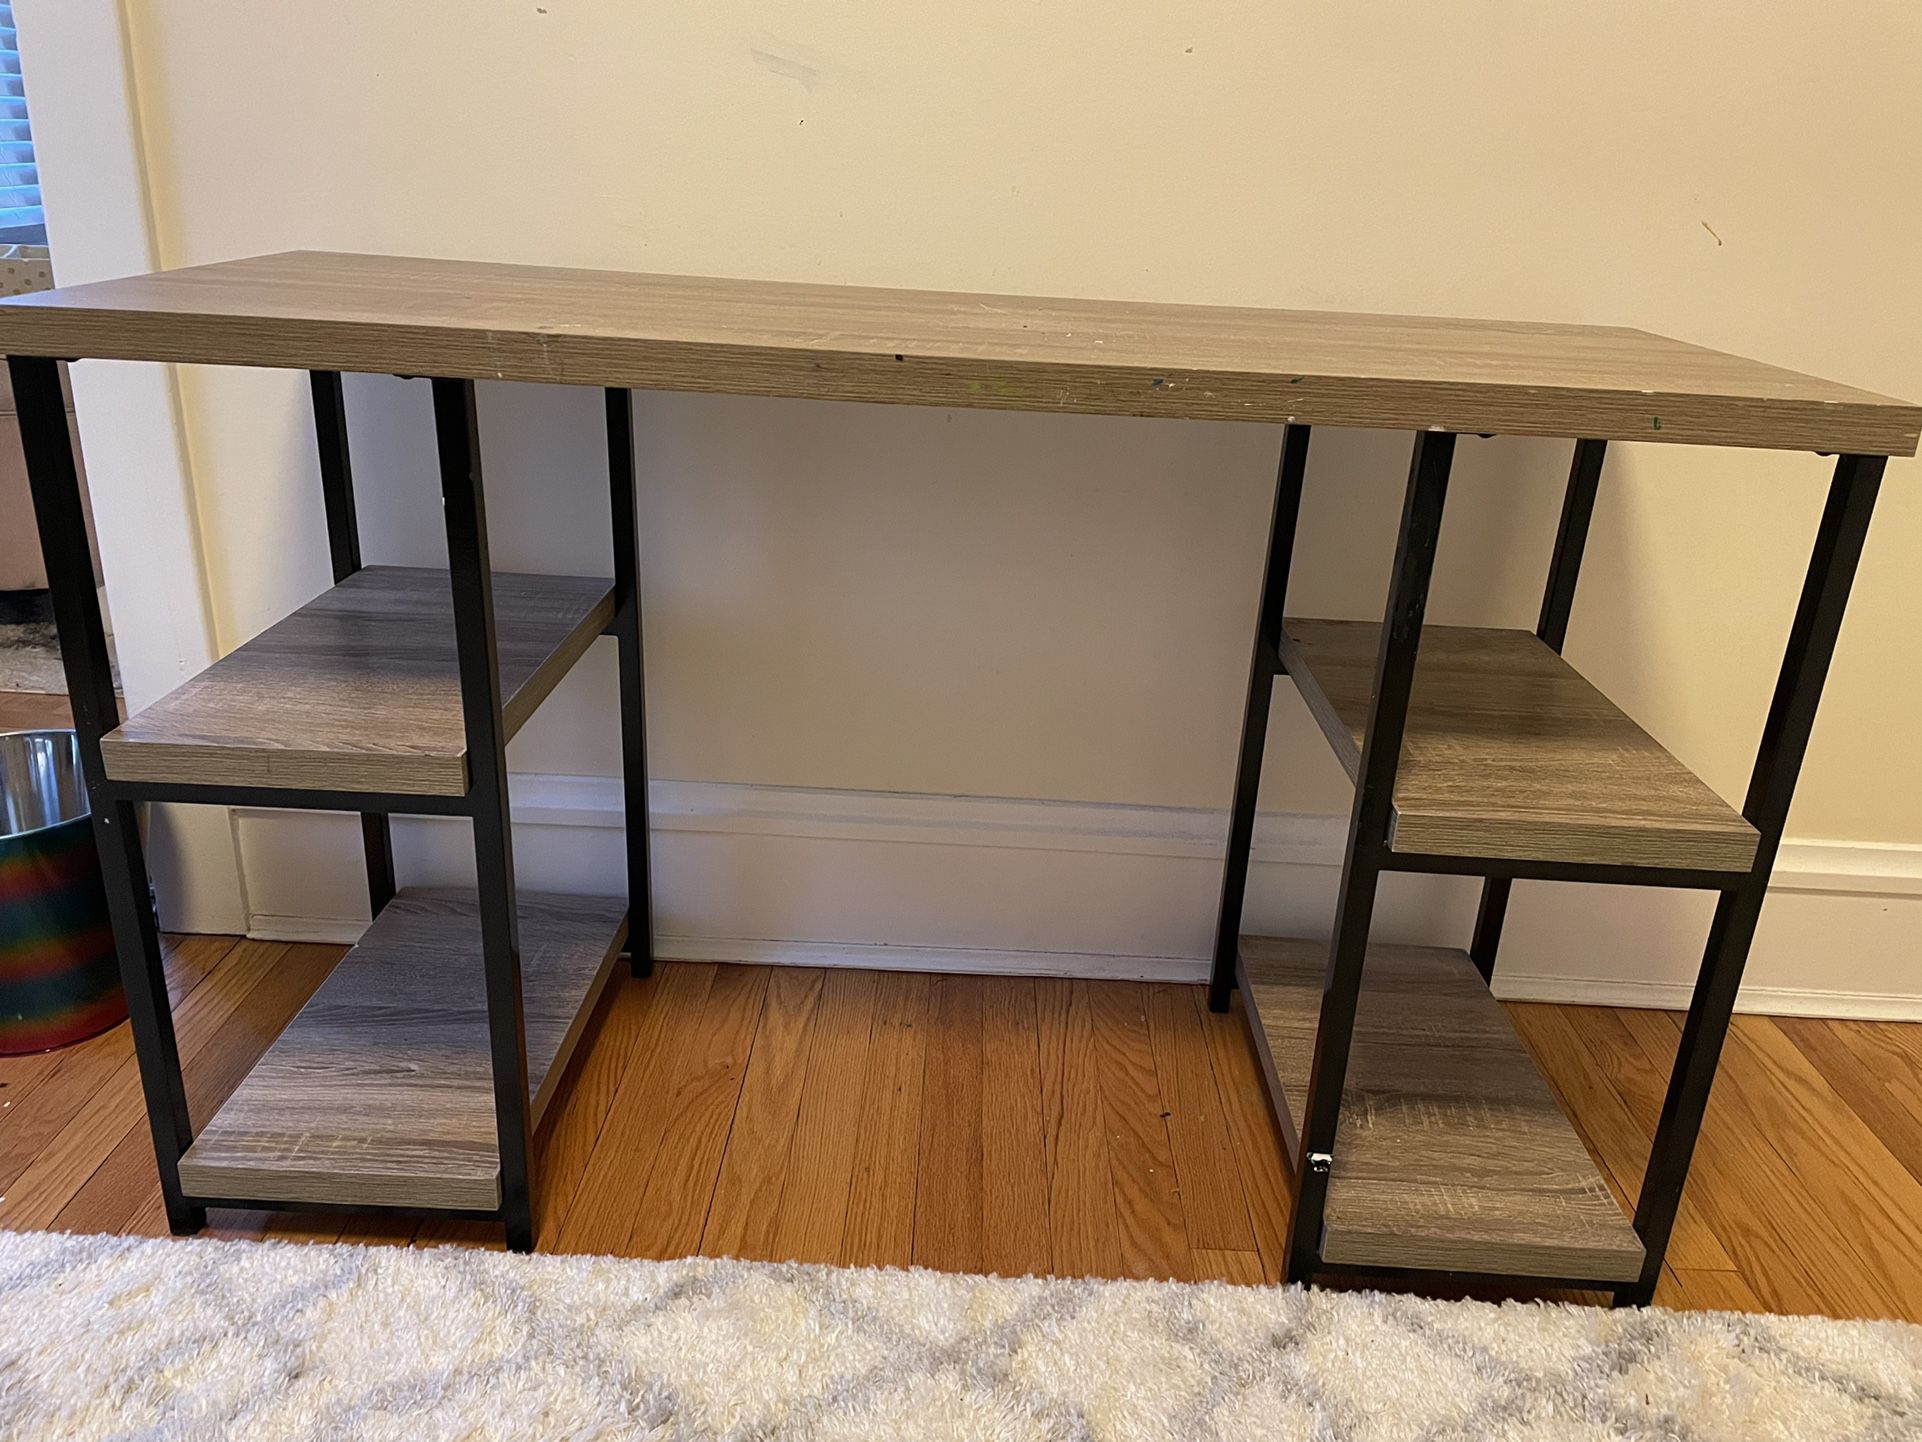 Small Desk/craft Table